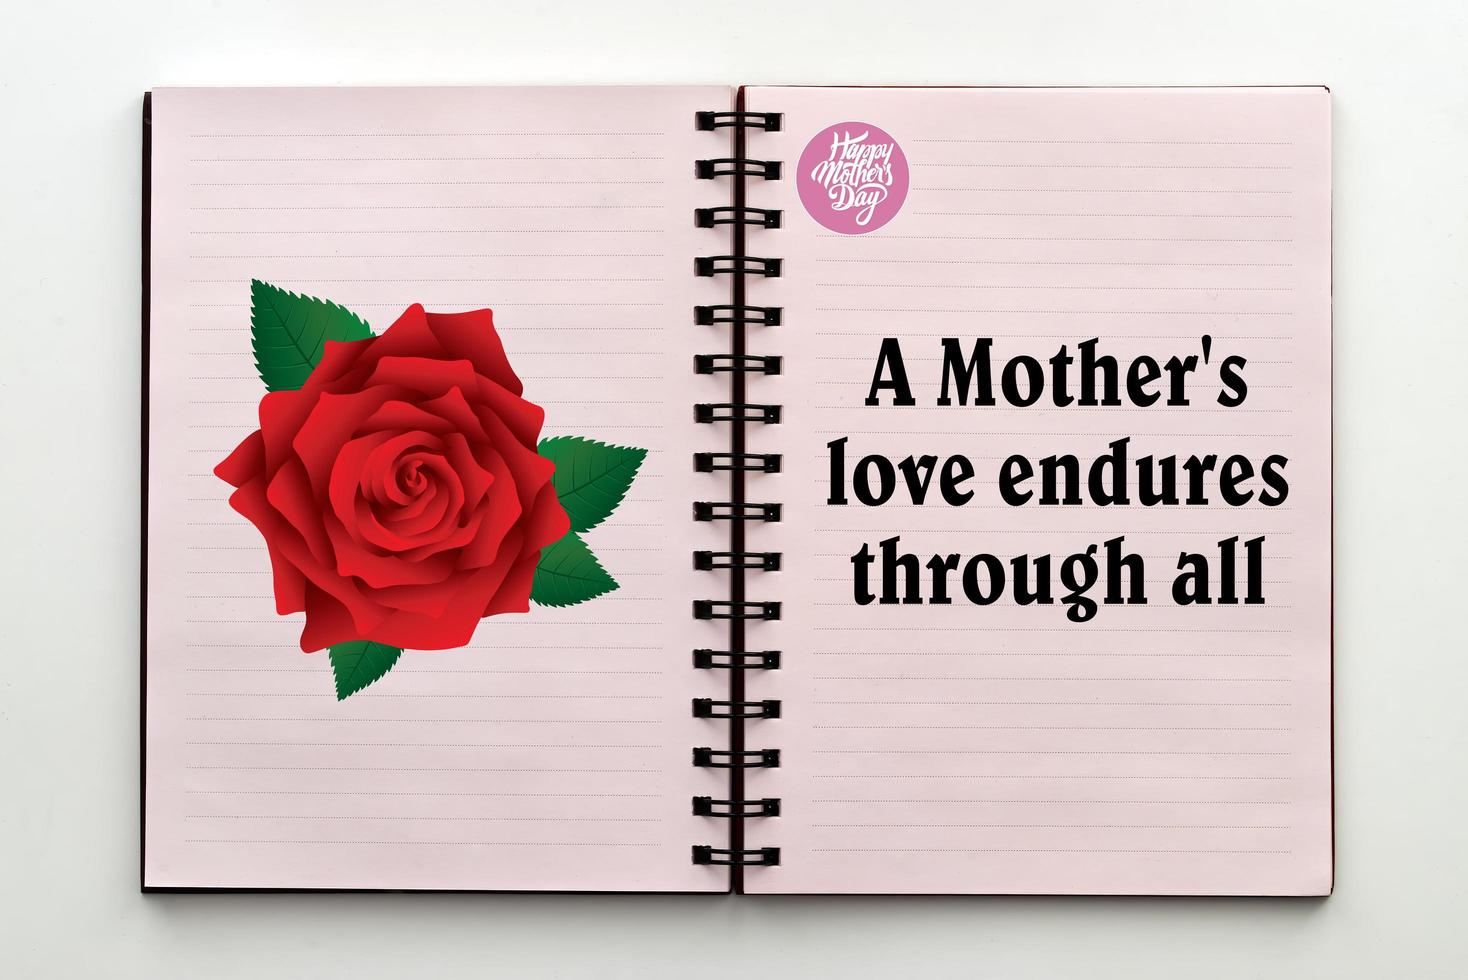 Happy Mother's day with quote written inside an open notebook. photo